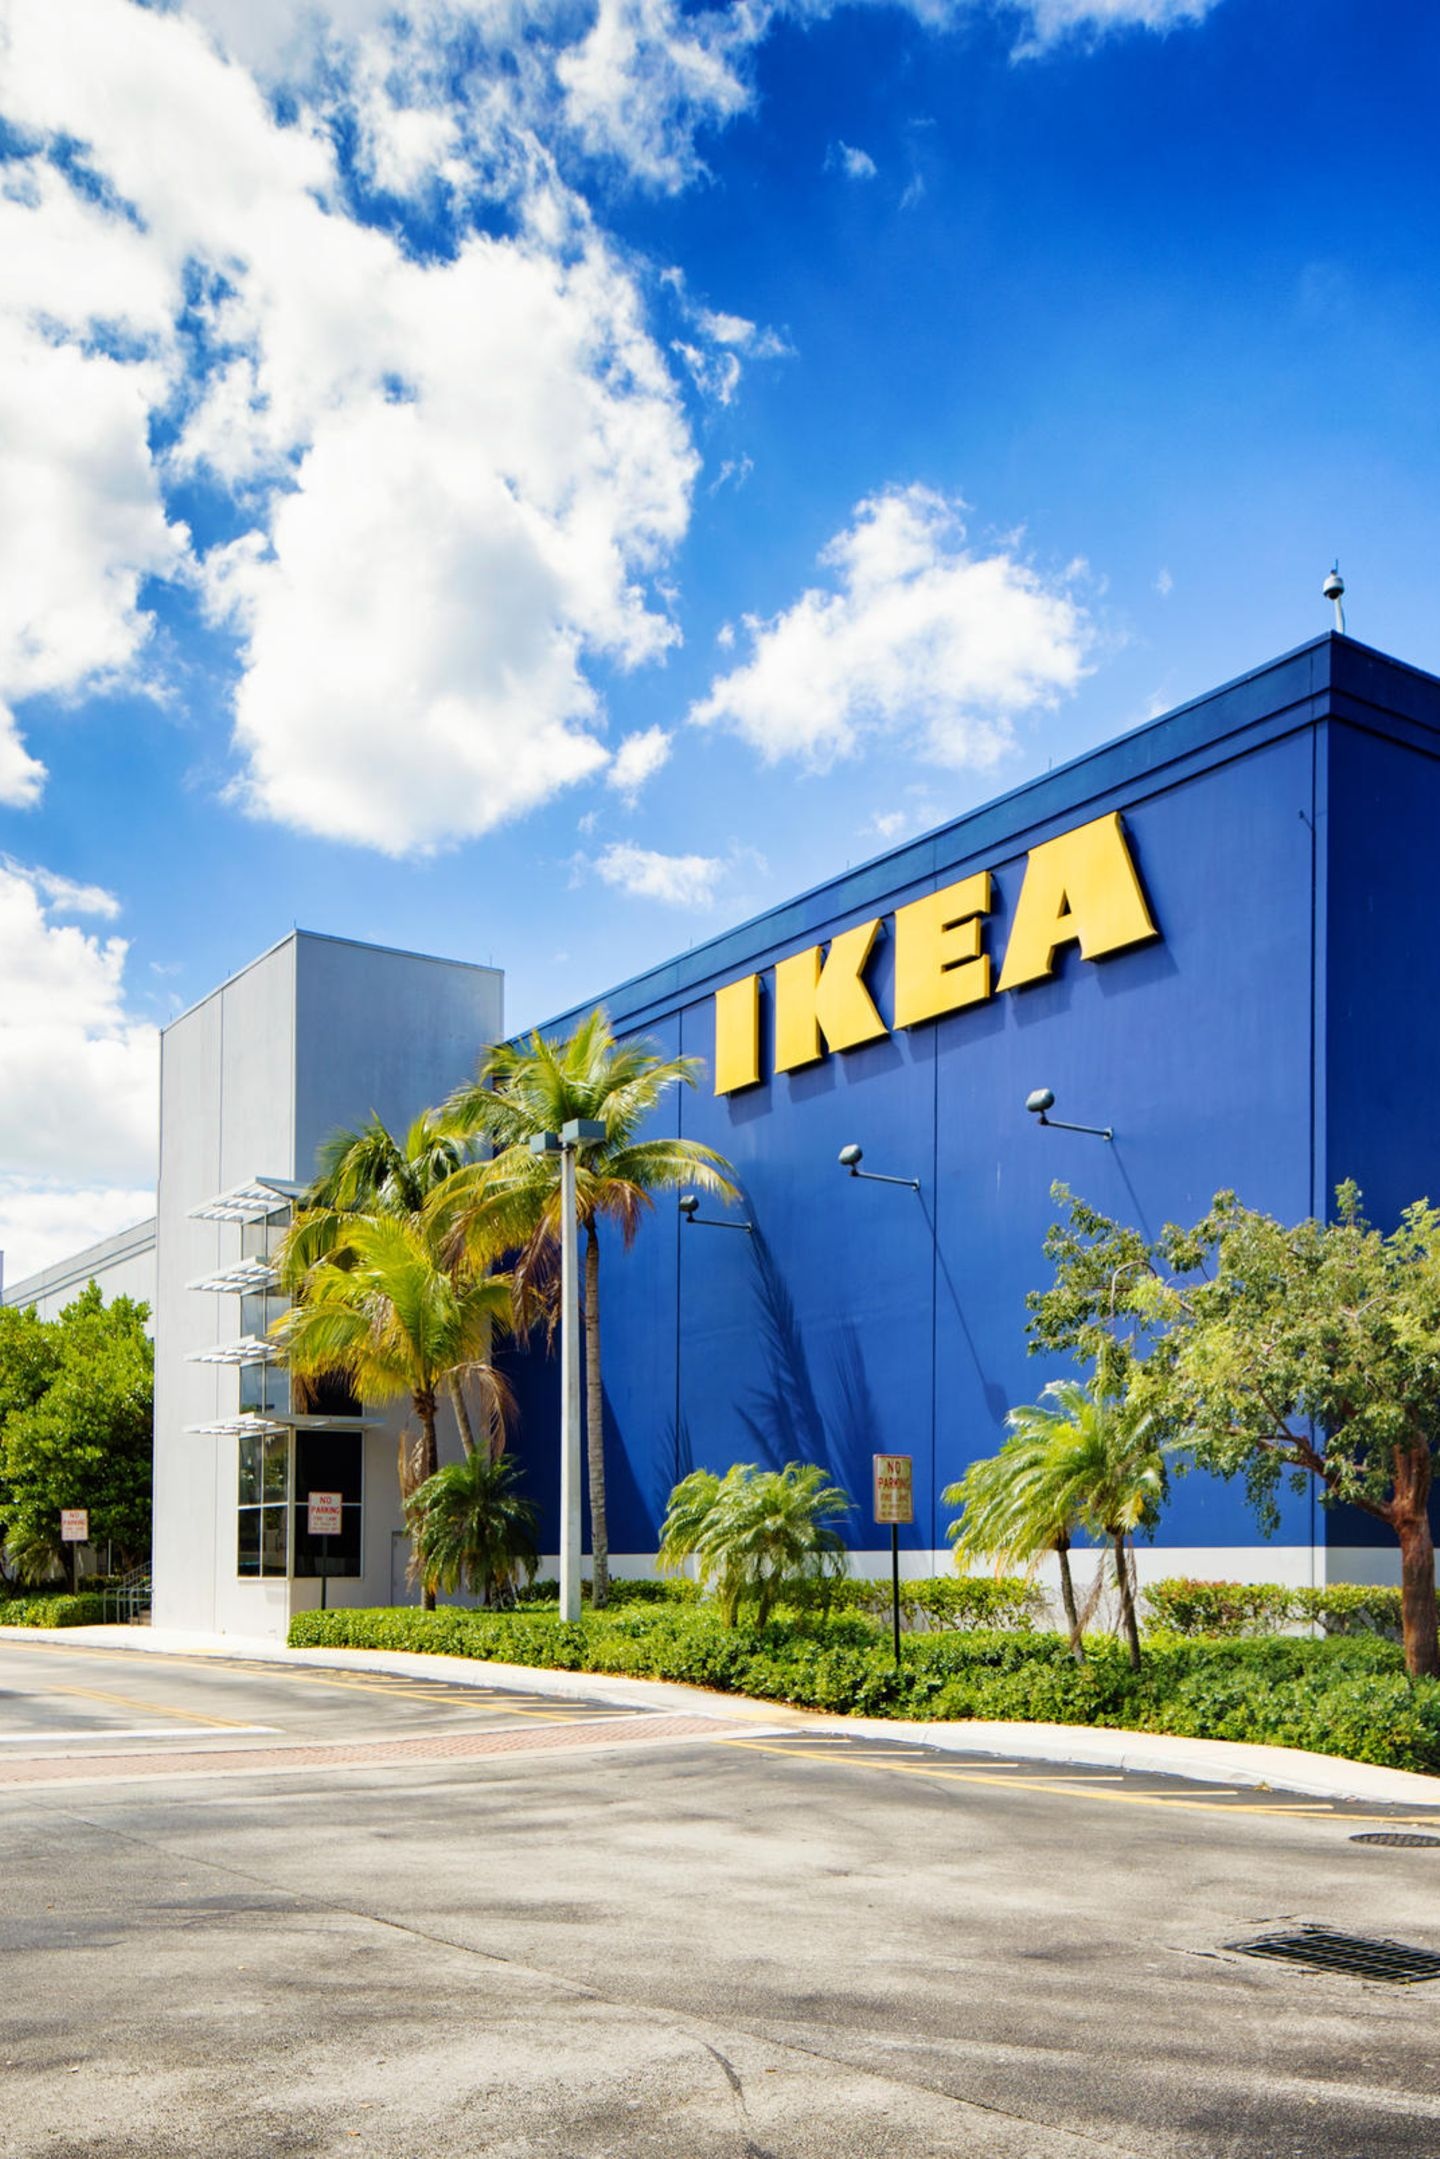 Ikea: 422 stores operating in 50 countries, 12,000 products on the website, Swedish-founded brand. 1440x2160 HD Wallpaper.